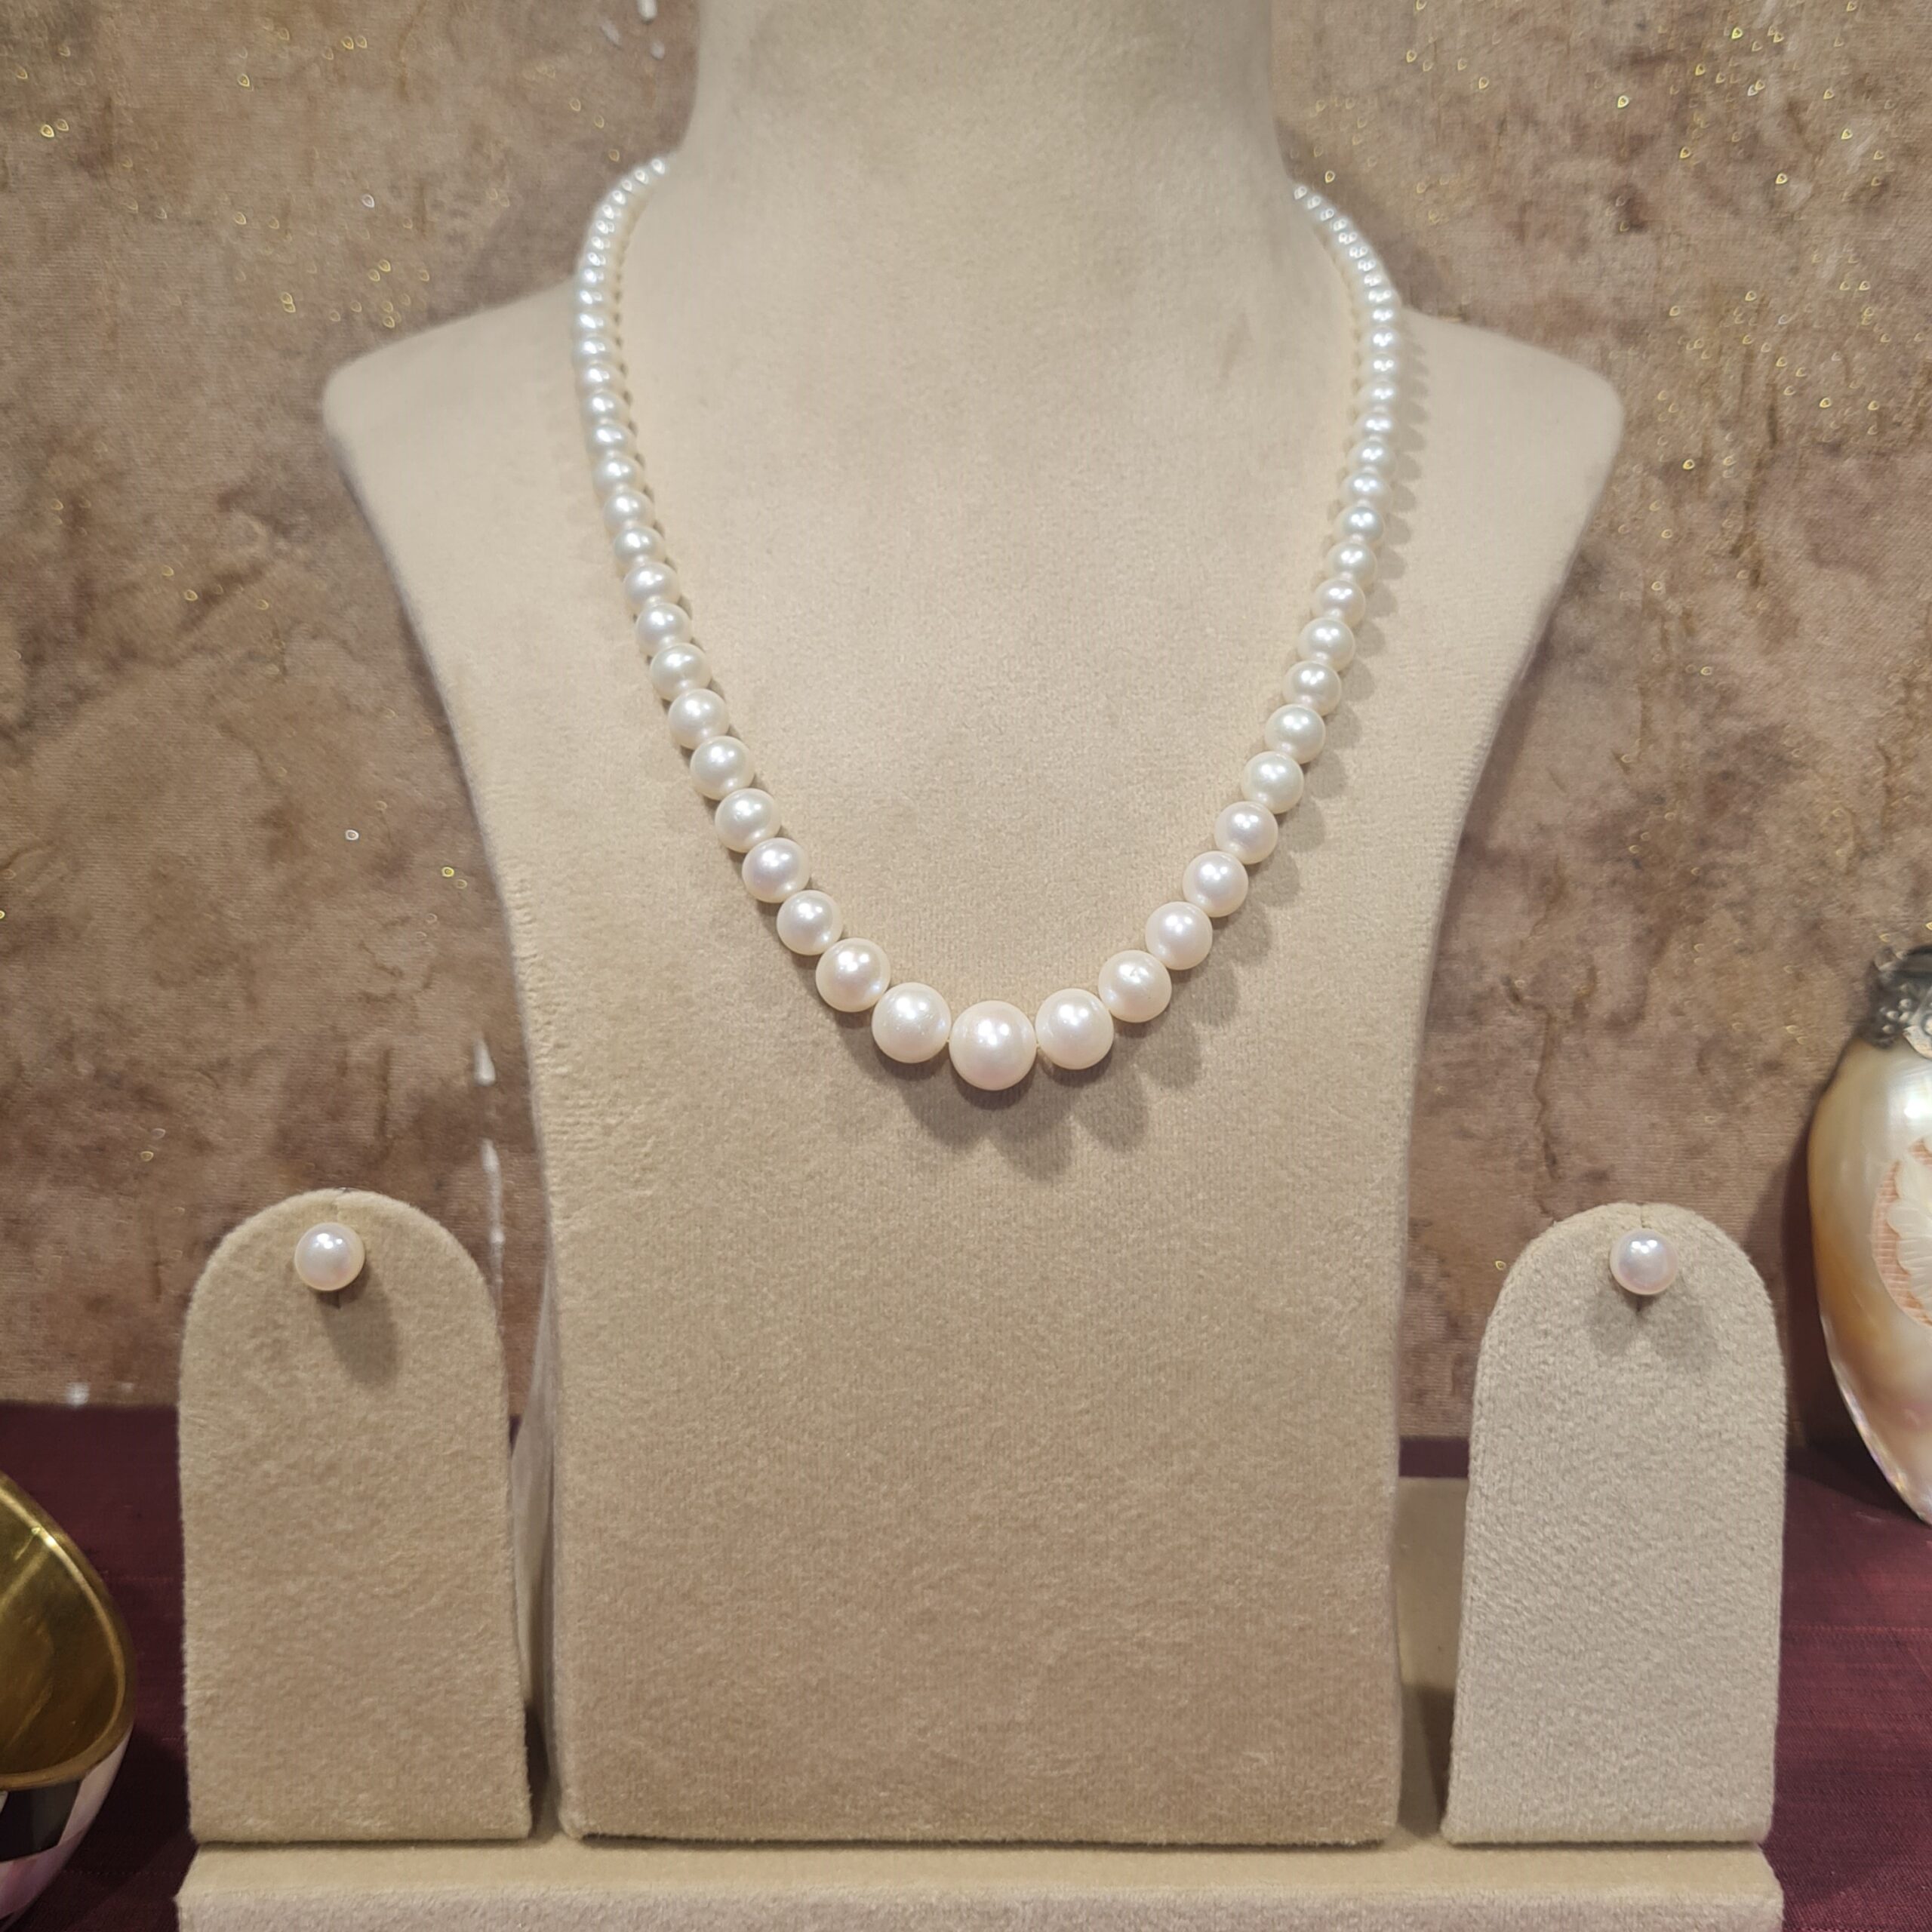 17-18mm White South Sea Pearl Necklace - AAAA Quality - Pearls of Joy